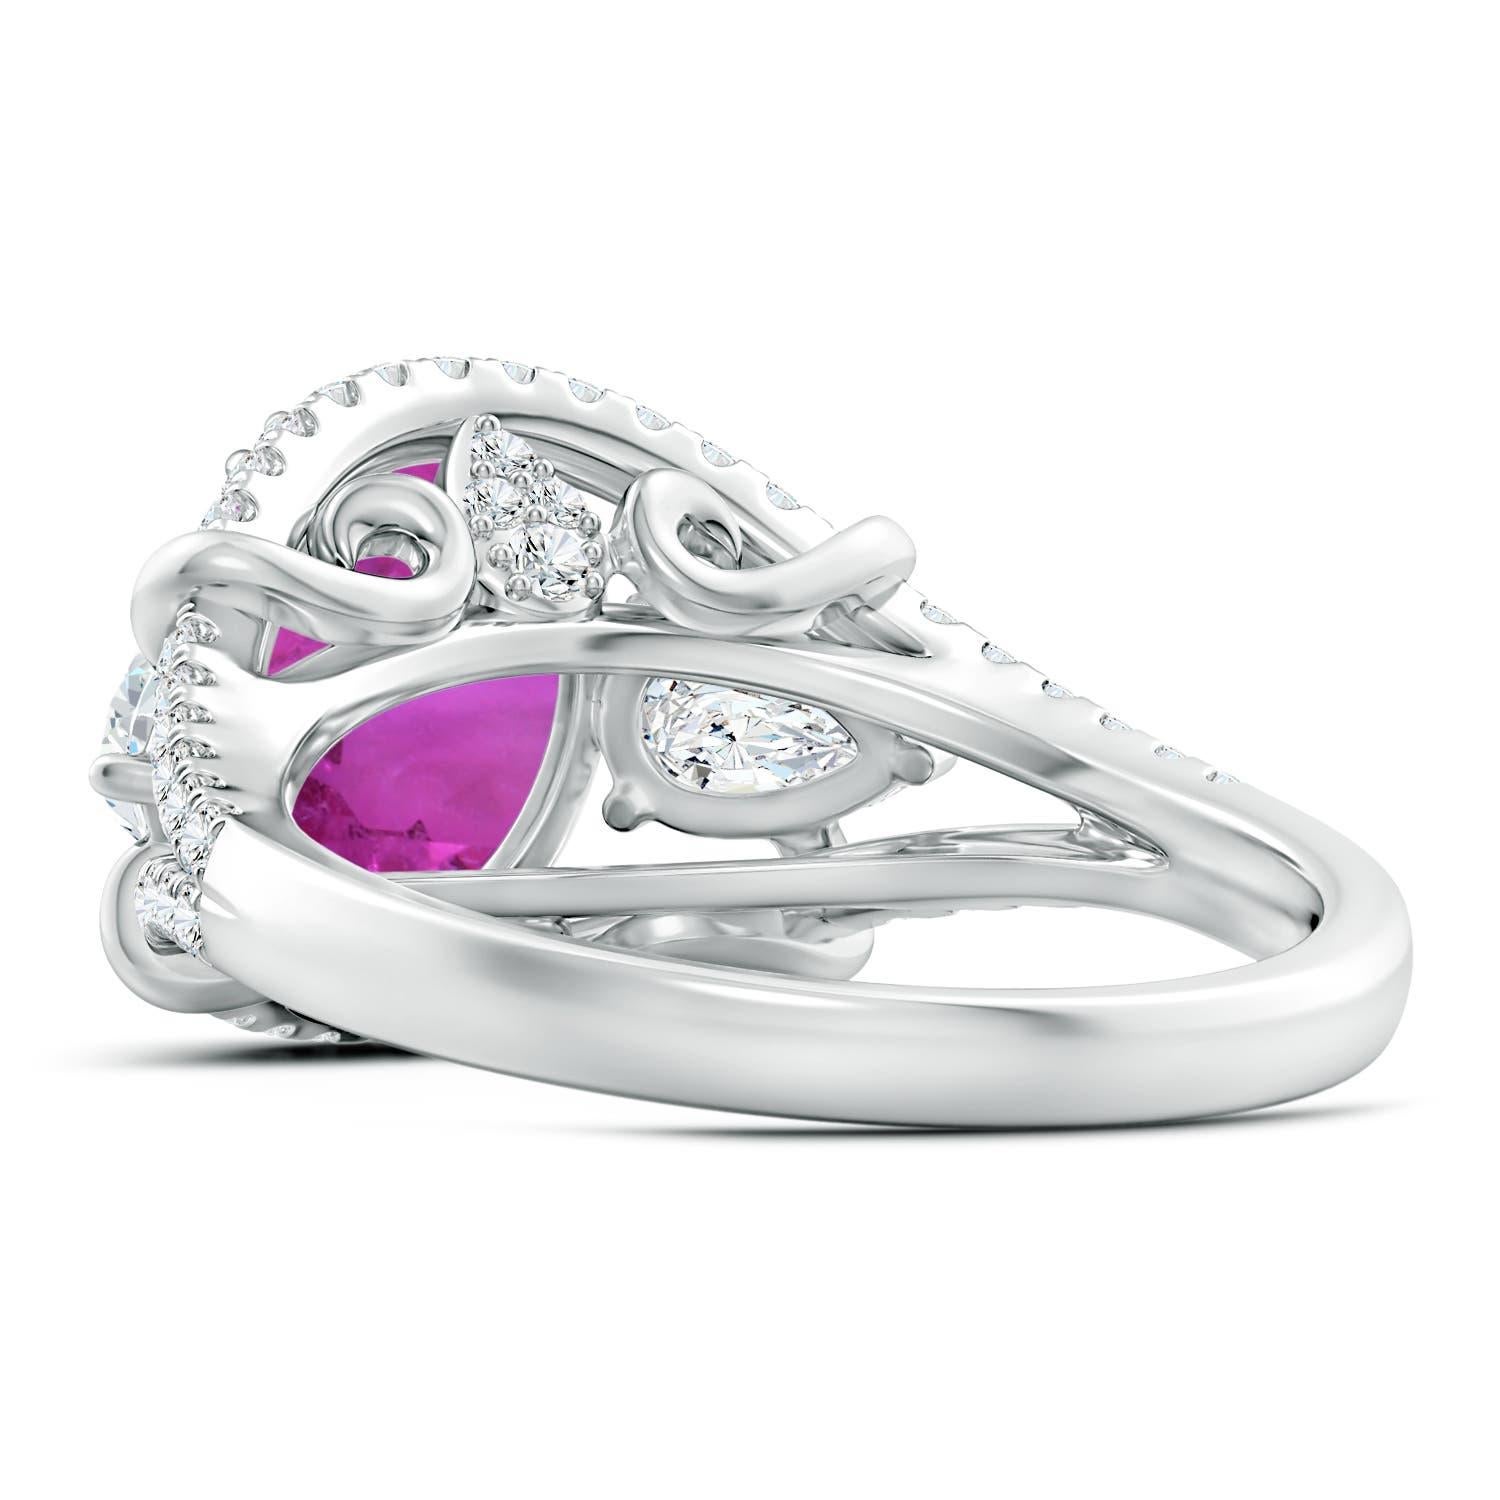 For Sale:  Angara GIA Certified Natural Pink Sapphire Ring in White Gold with Diamonds 4